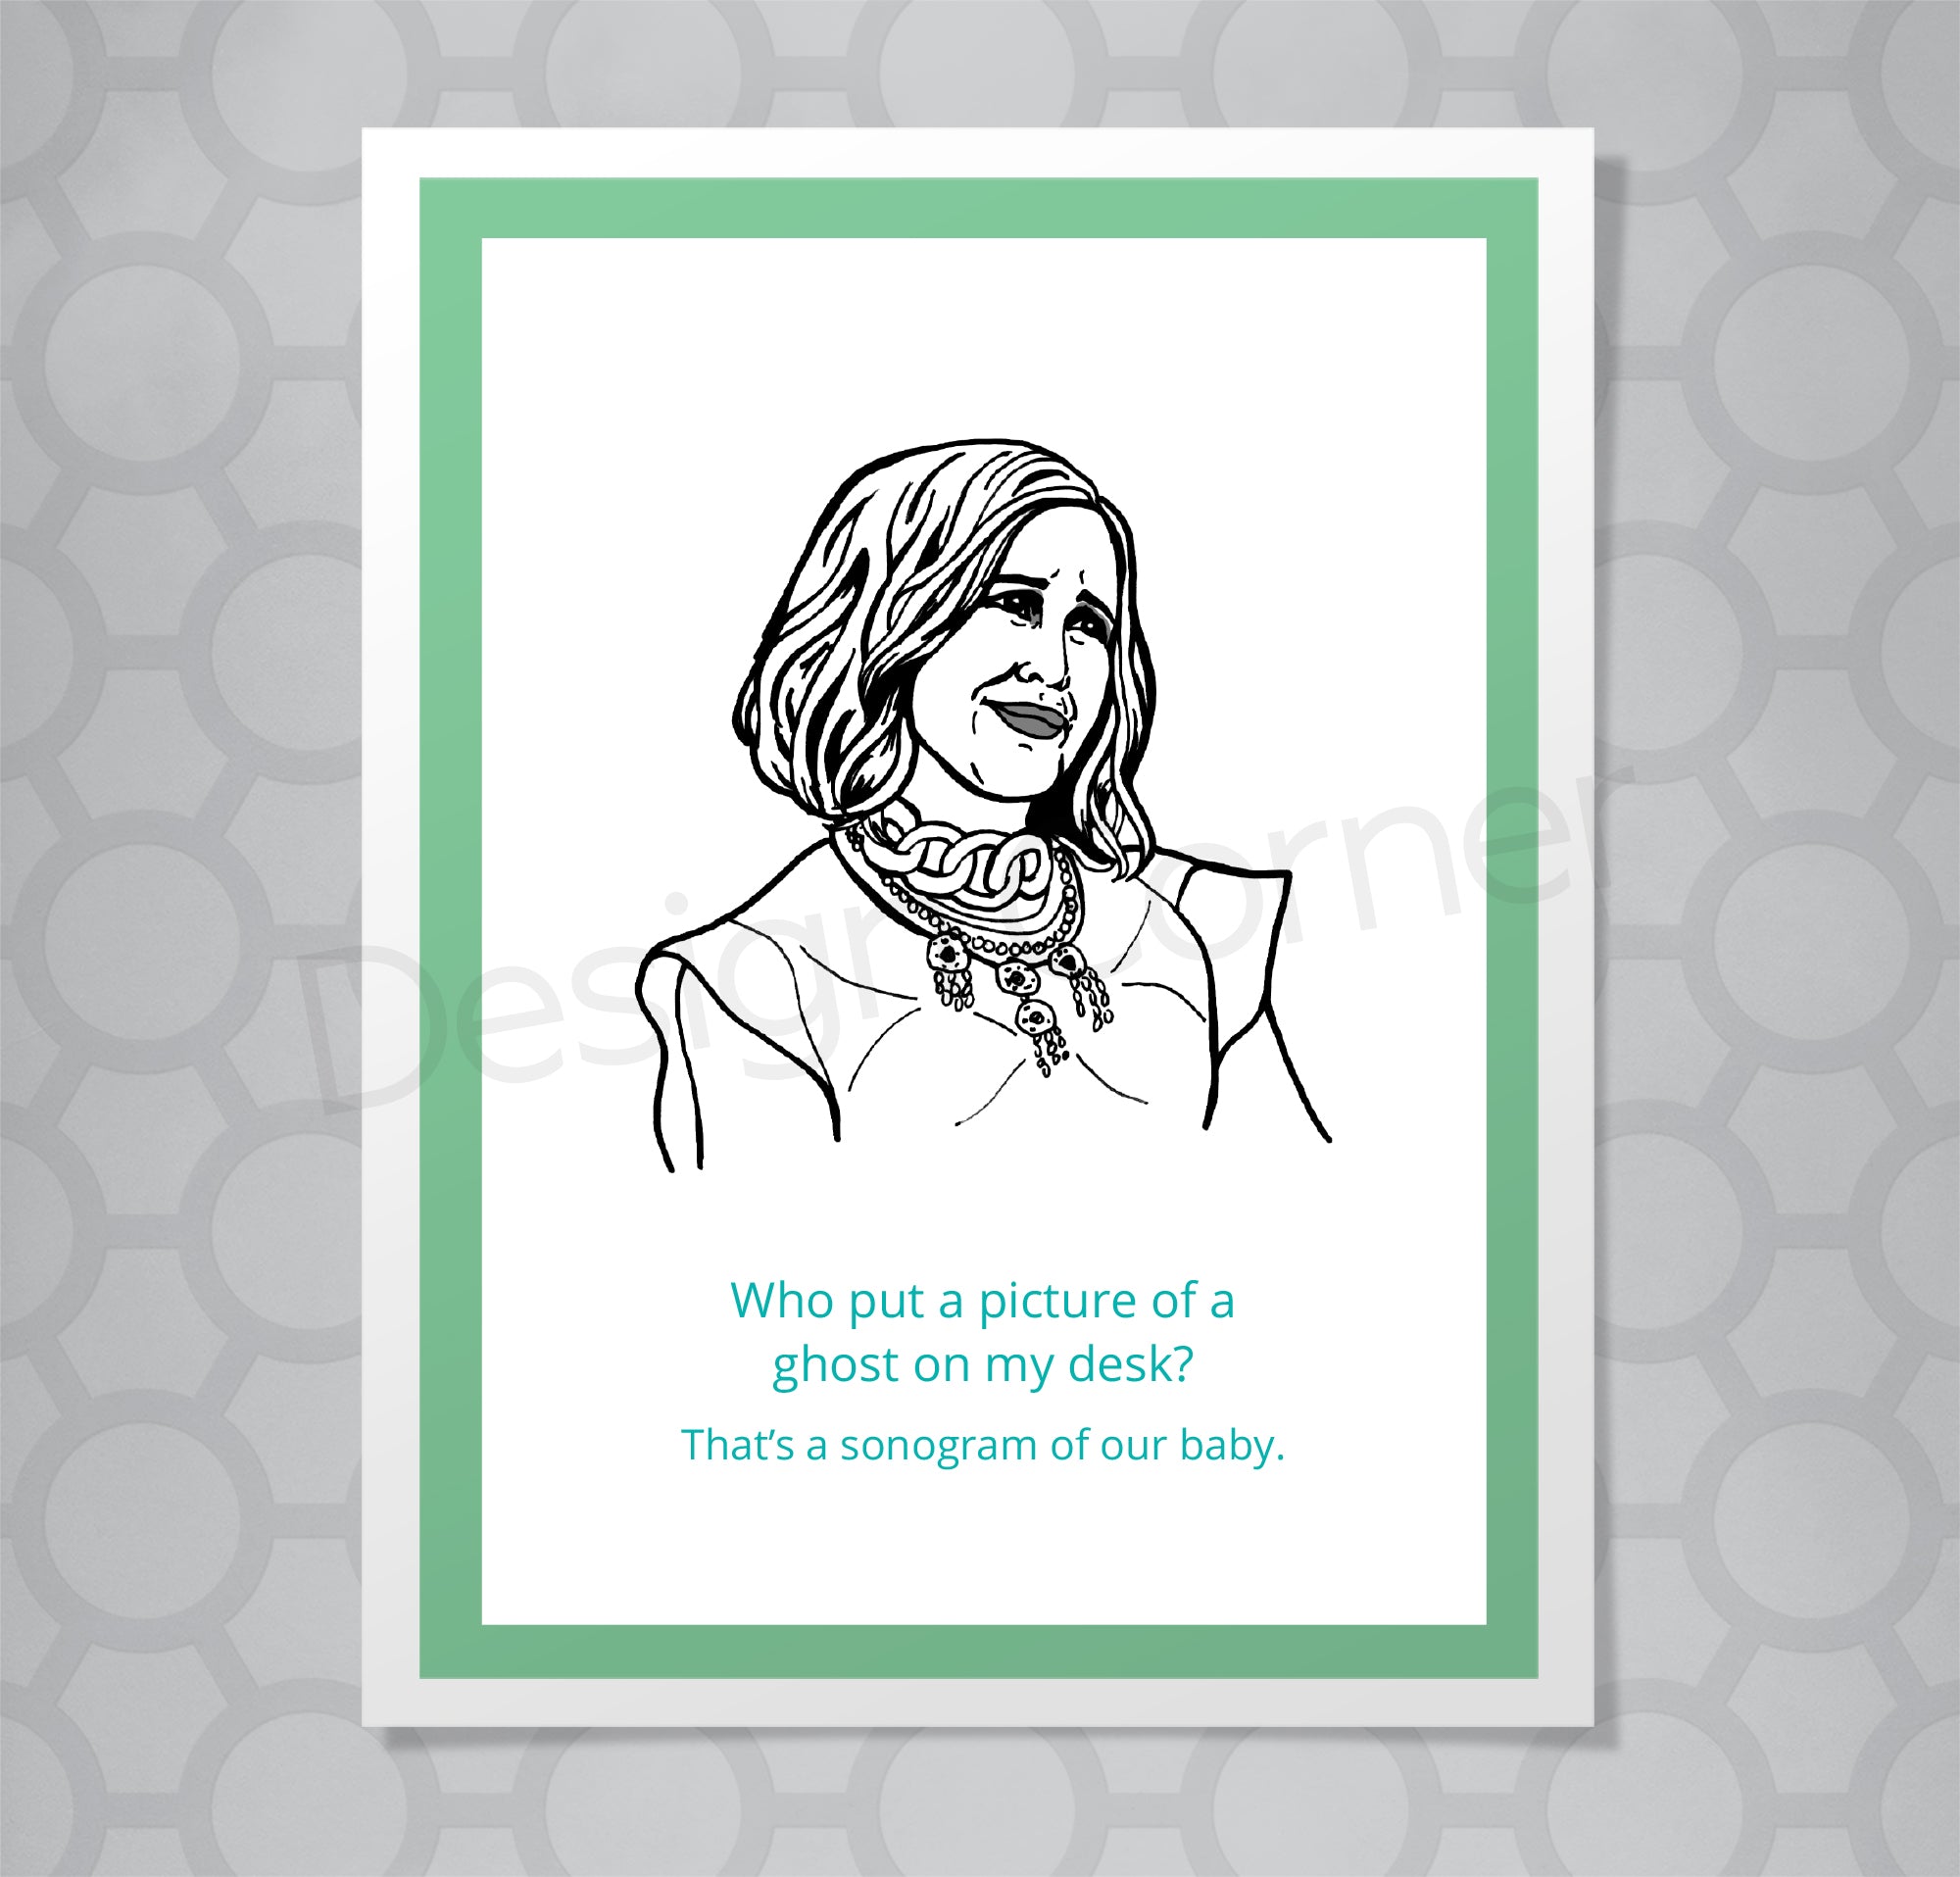 Greeting card with illustration of Schitts Creek Moira rose. Caption says "Who put a picture of a ghost on my desk? That's a sonogram of our baby"